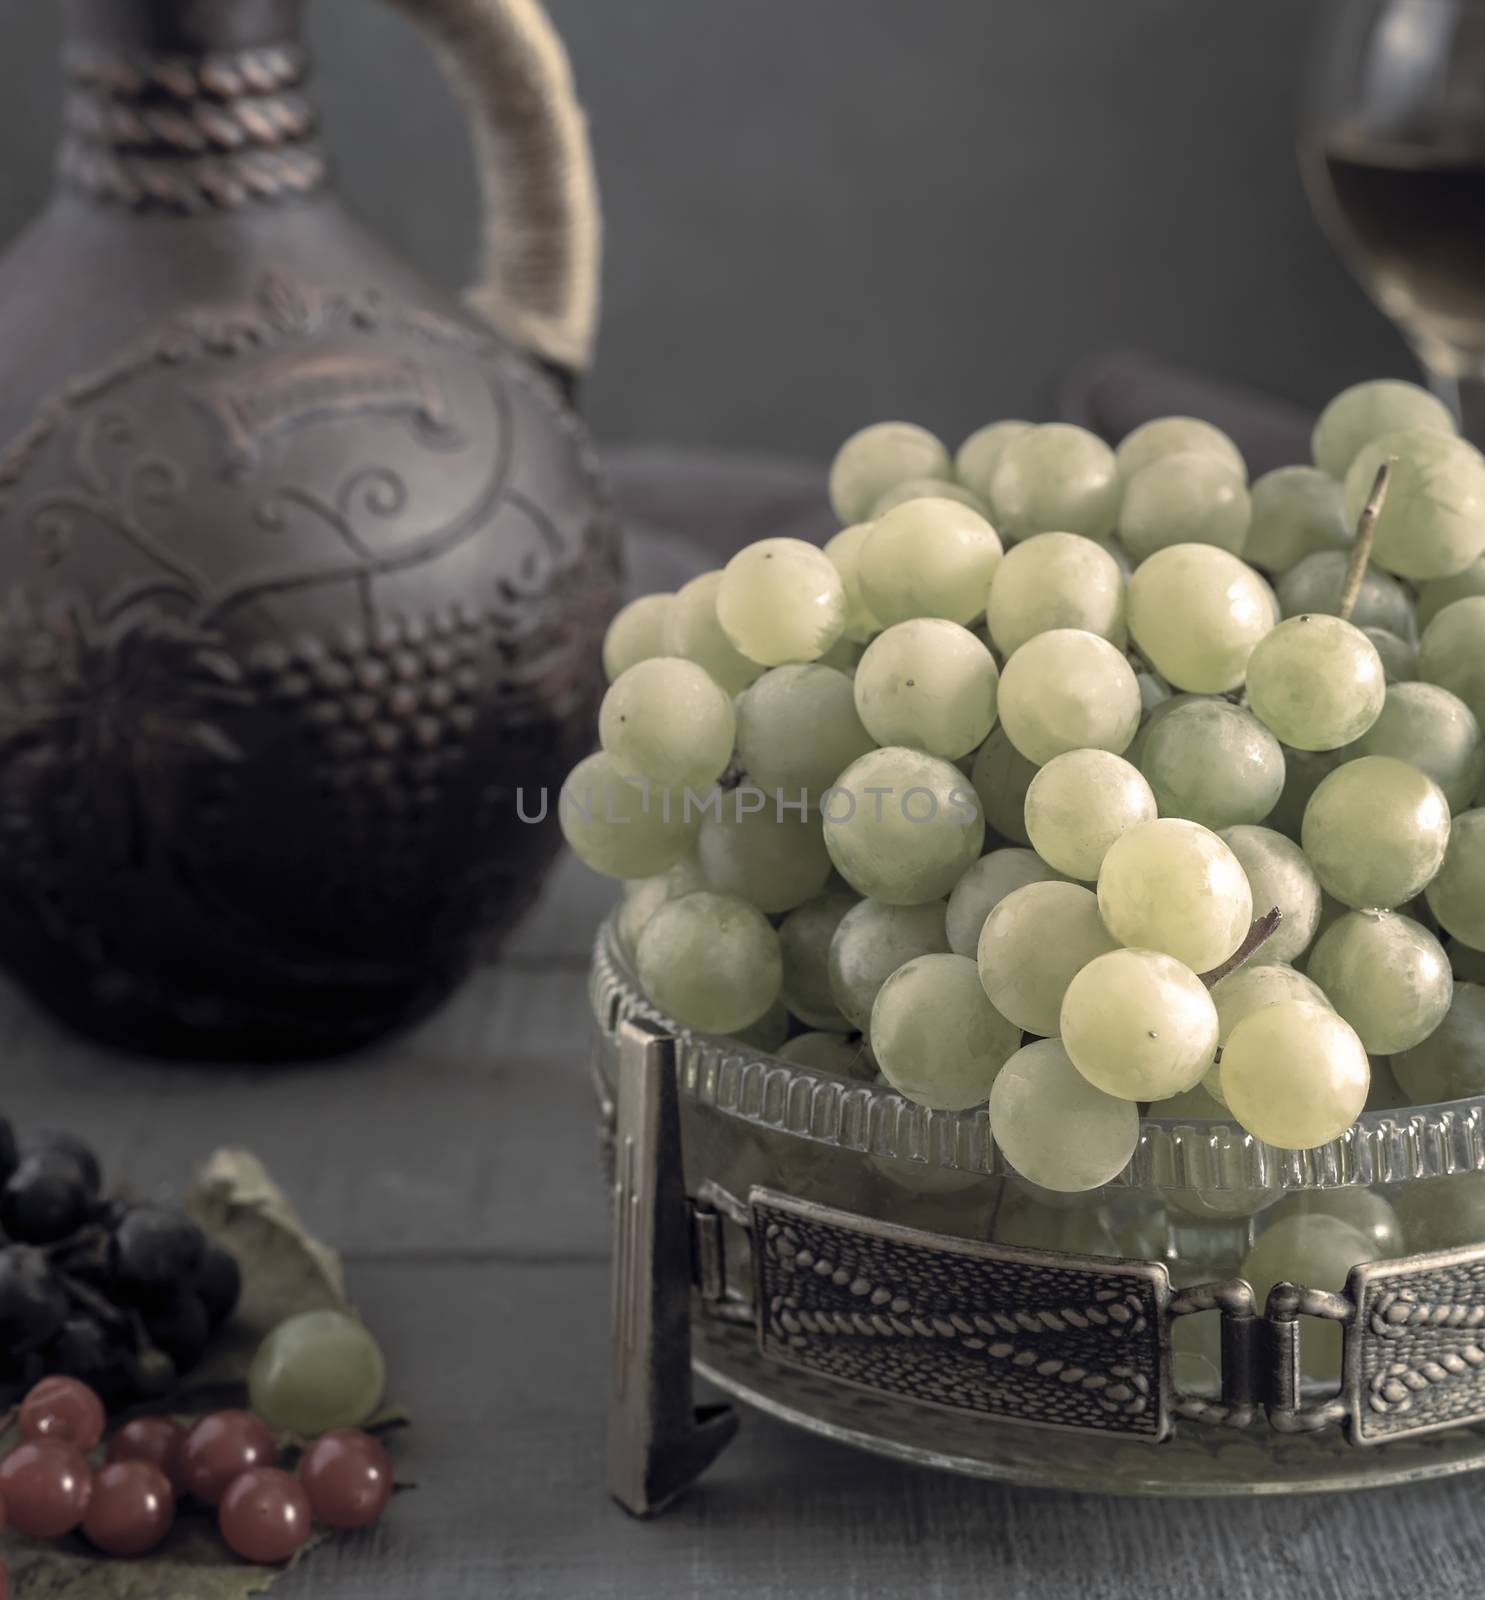 Grapes and wine in a jug and glasses by georgina198